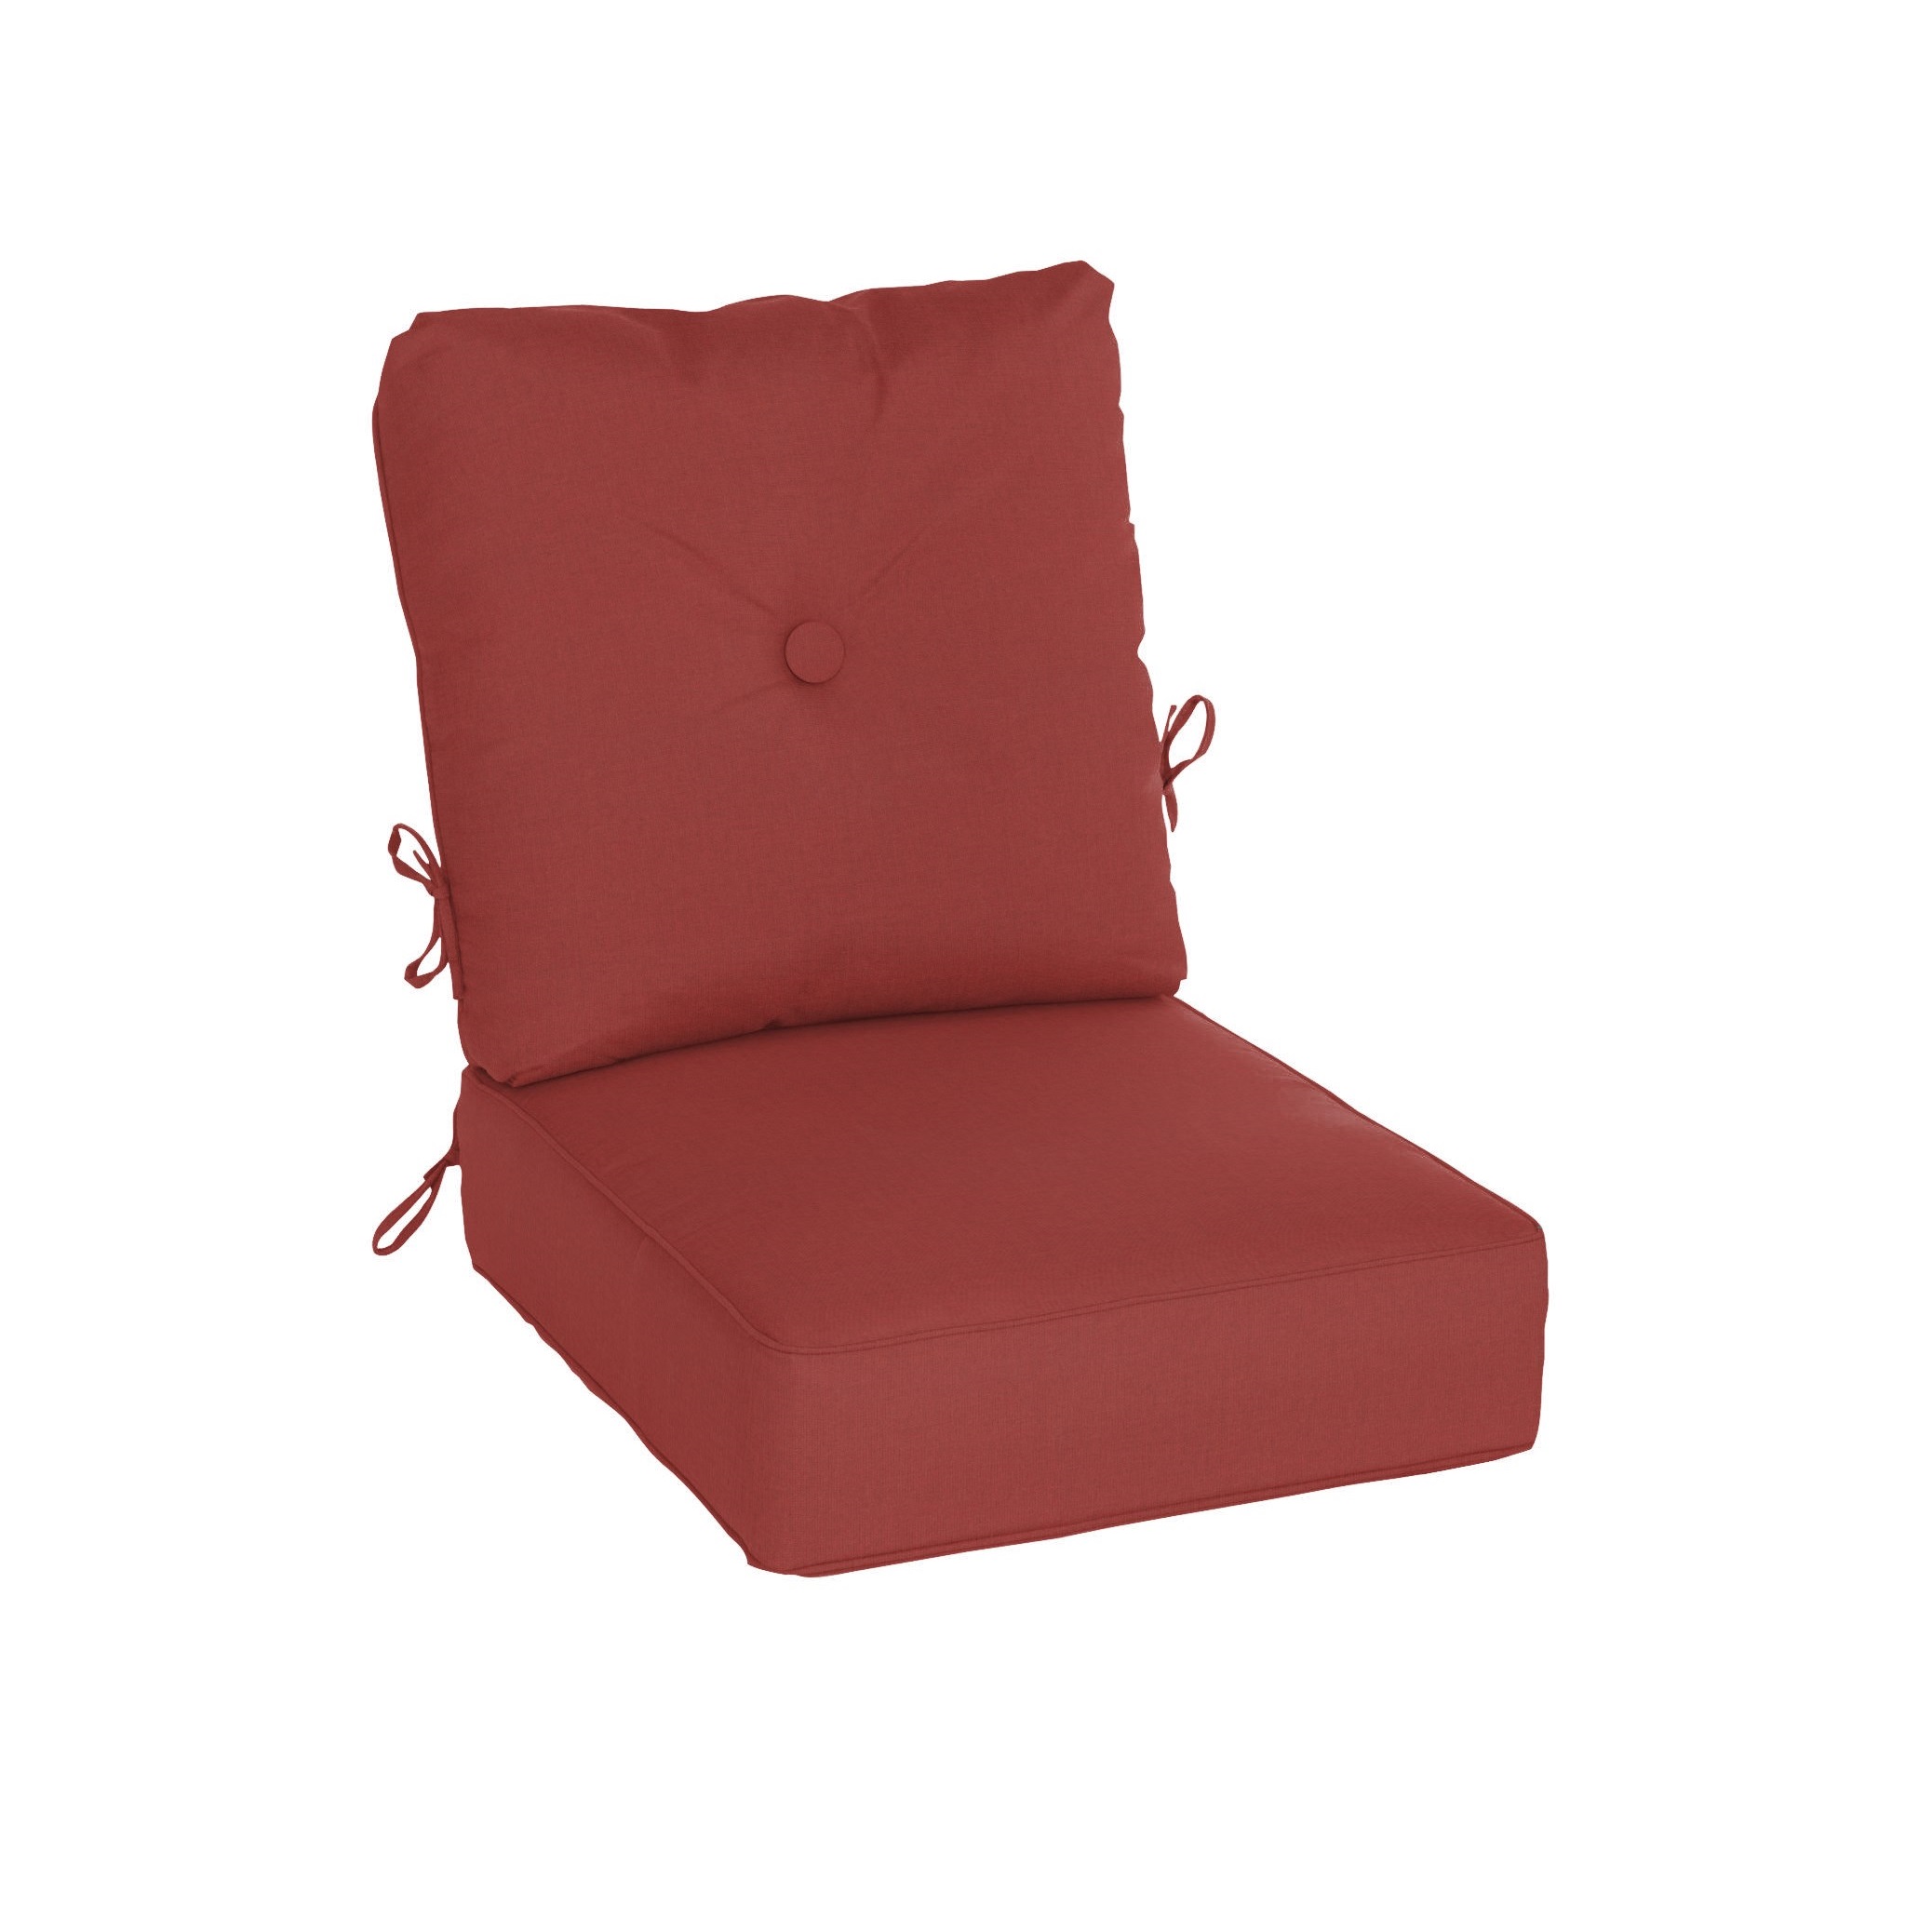 cast pomegranate water resistant estate chair cushion product image